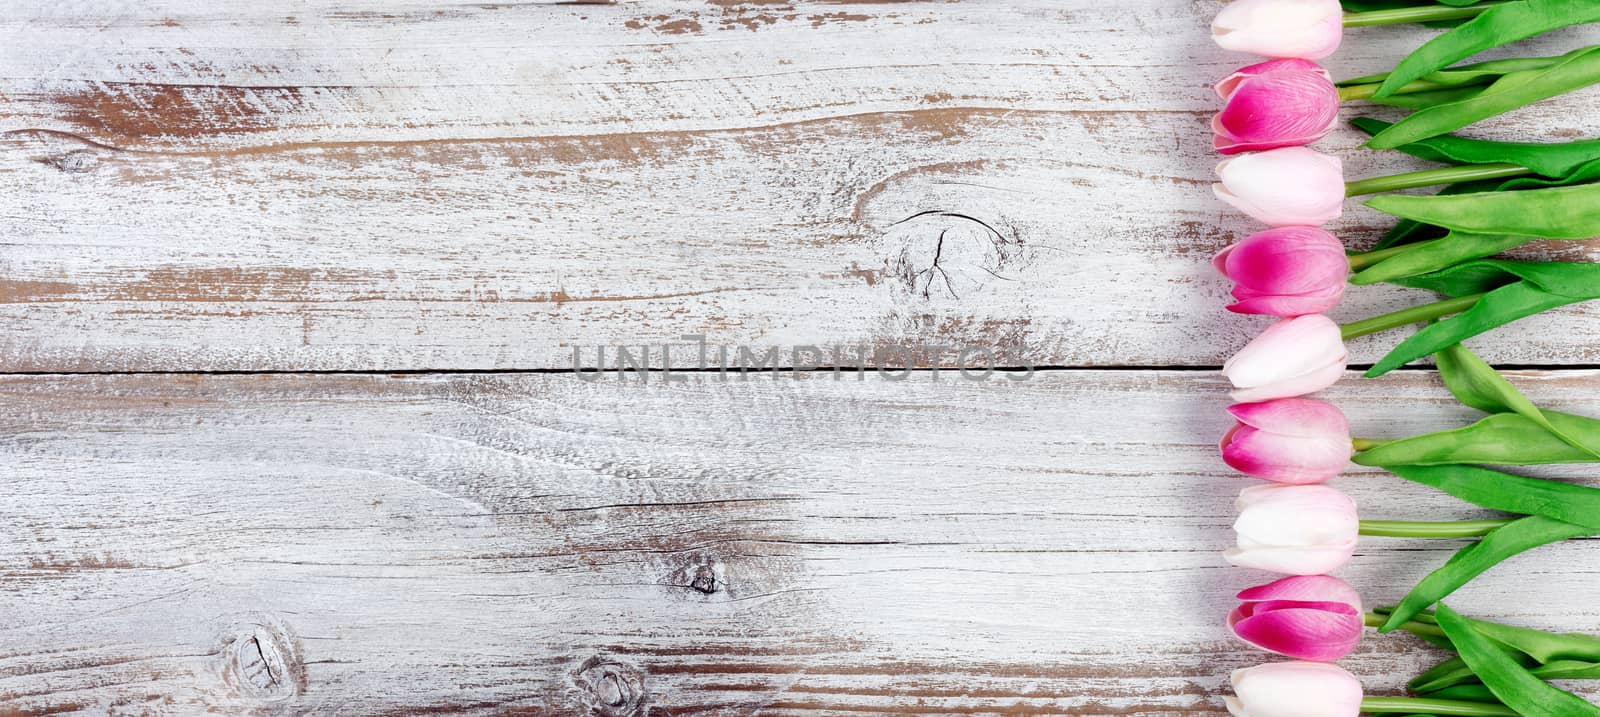 Seasonal Tulips for the Spring holidays on white rustic wooden b by tab1962